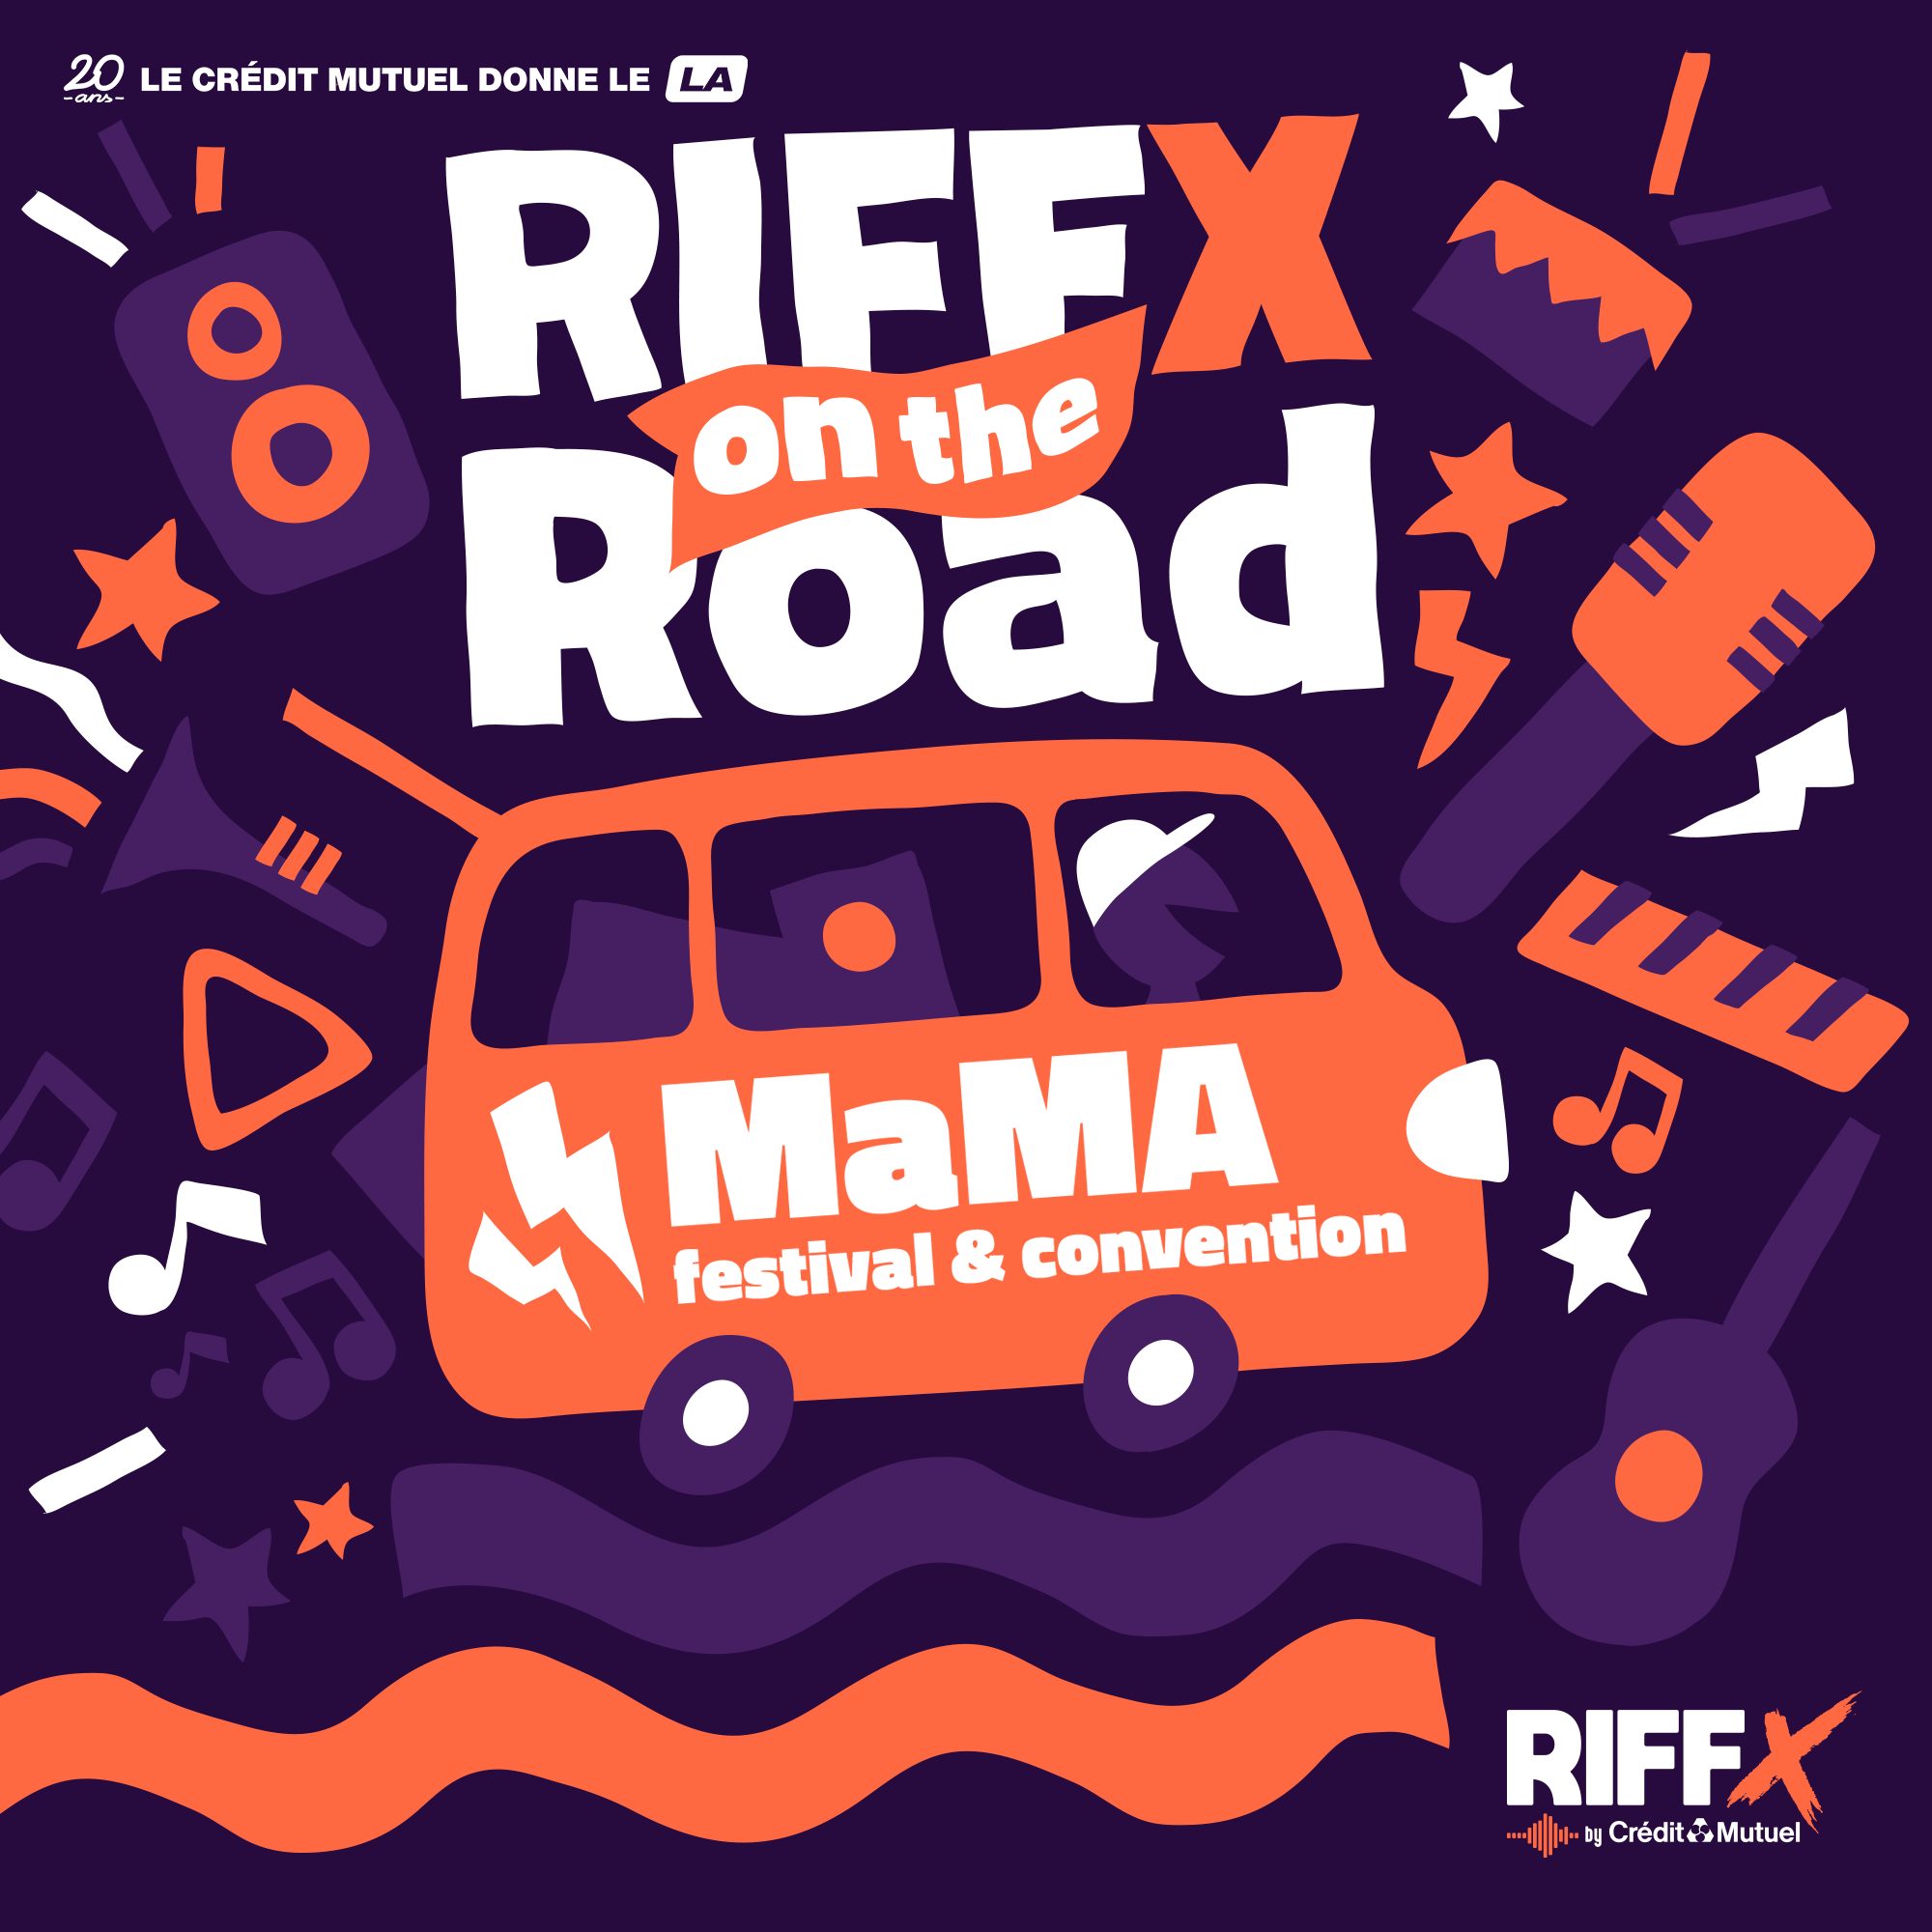 RIFFX on the Road #32 à MaMA Festival et Convention